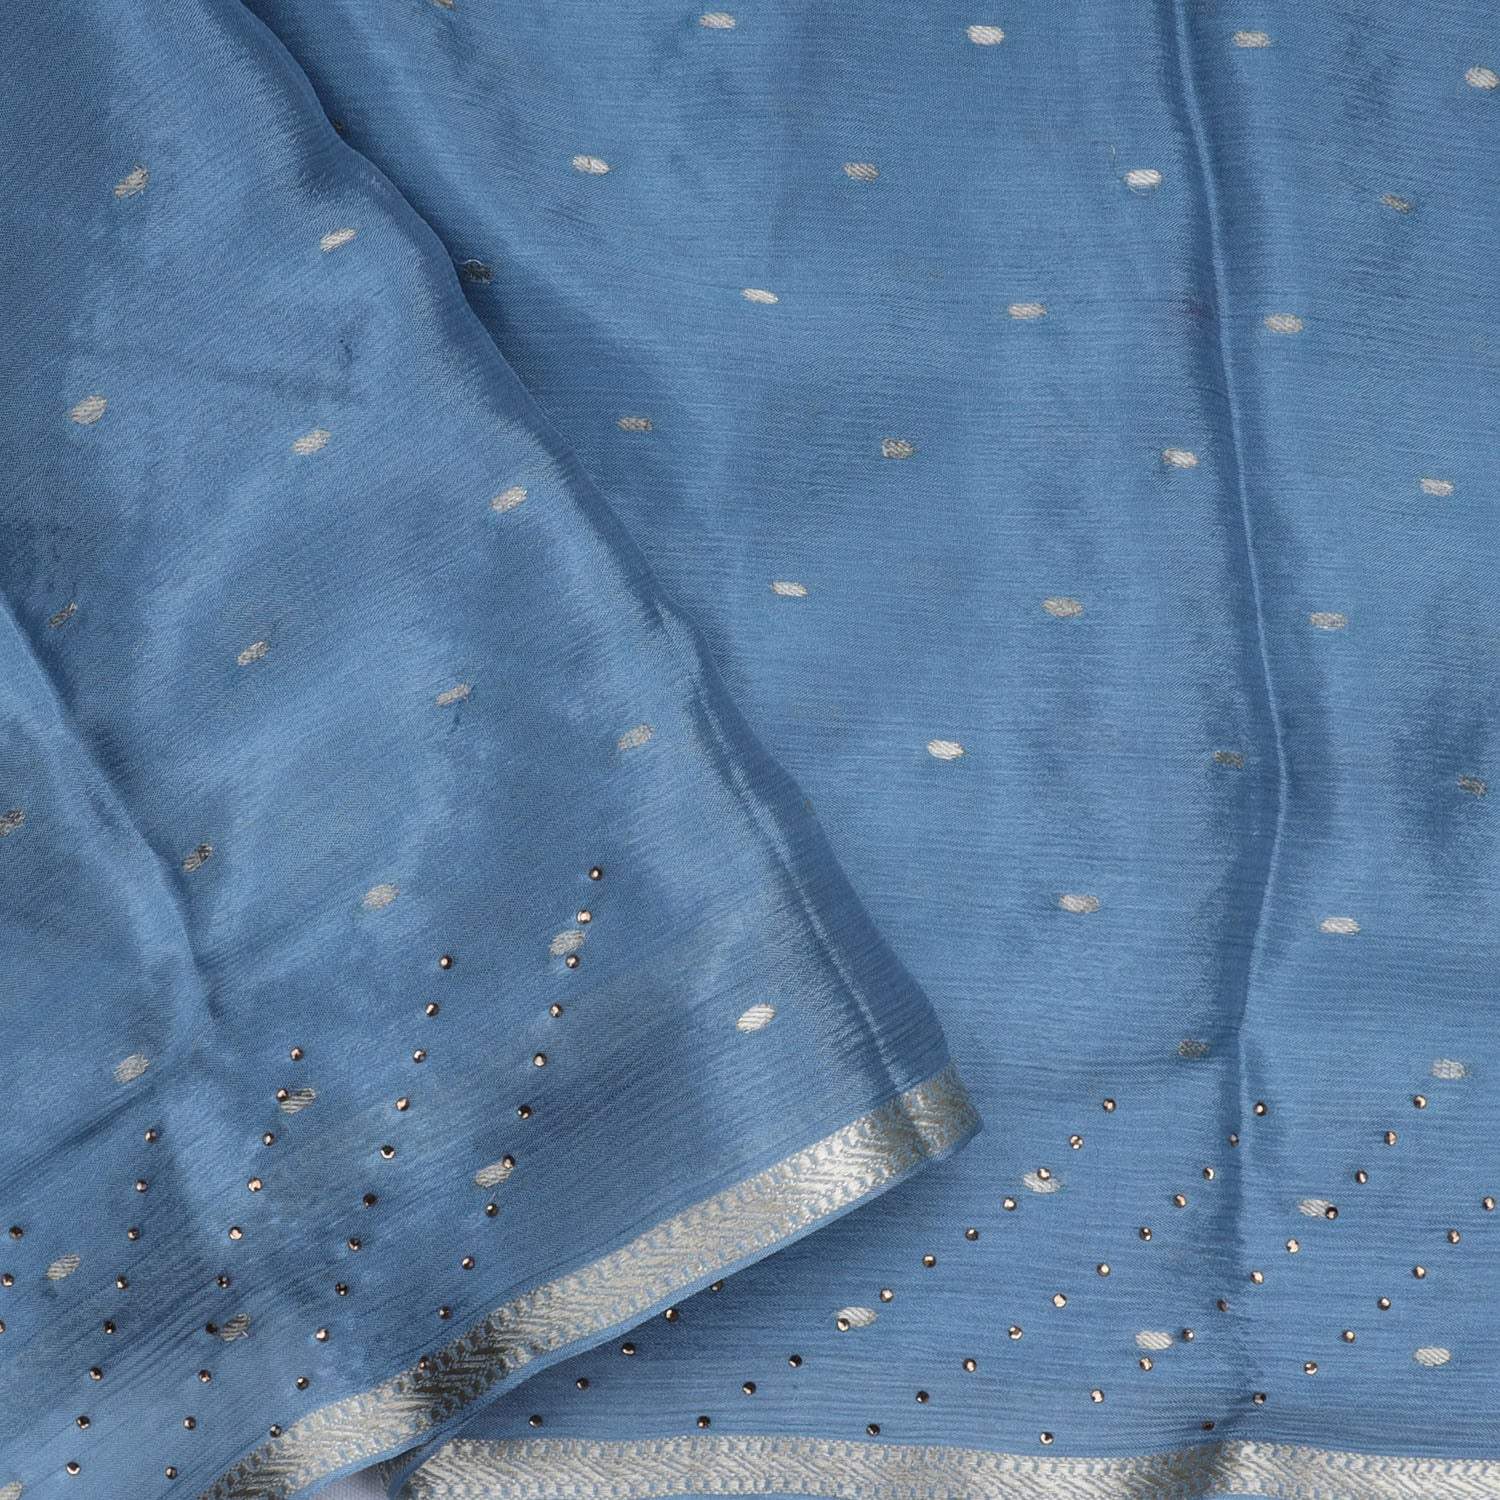 Shades Of Blue Chiffon Saree With Embroidered Stone Work - Singhania's